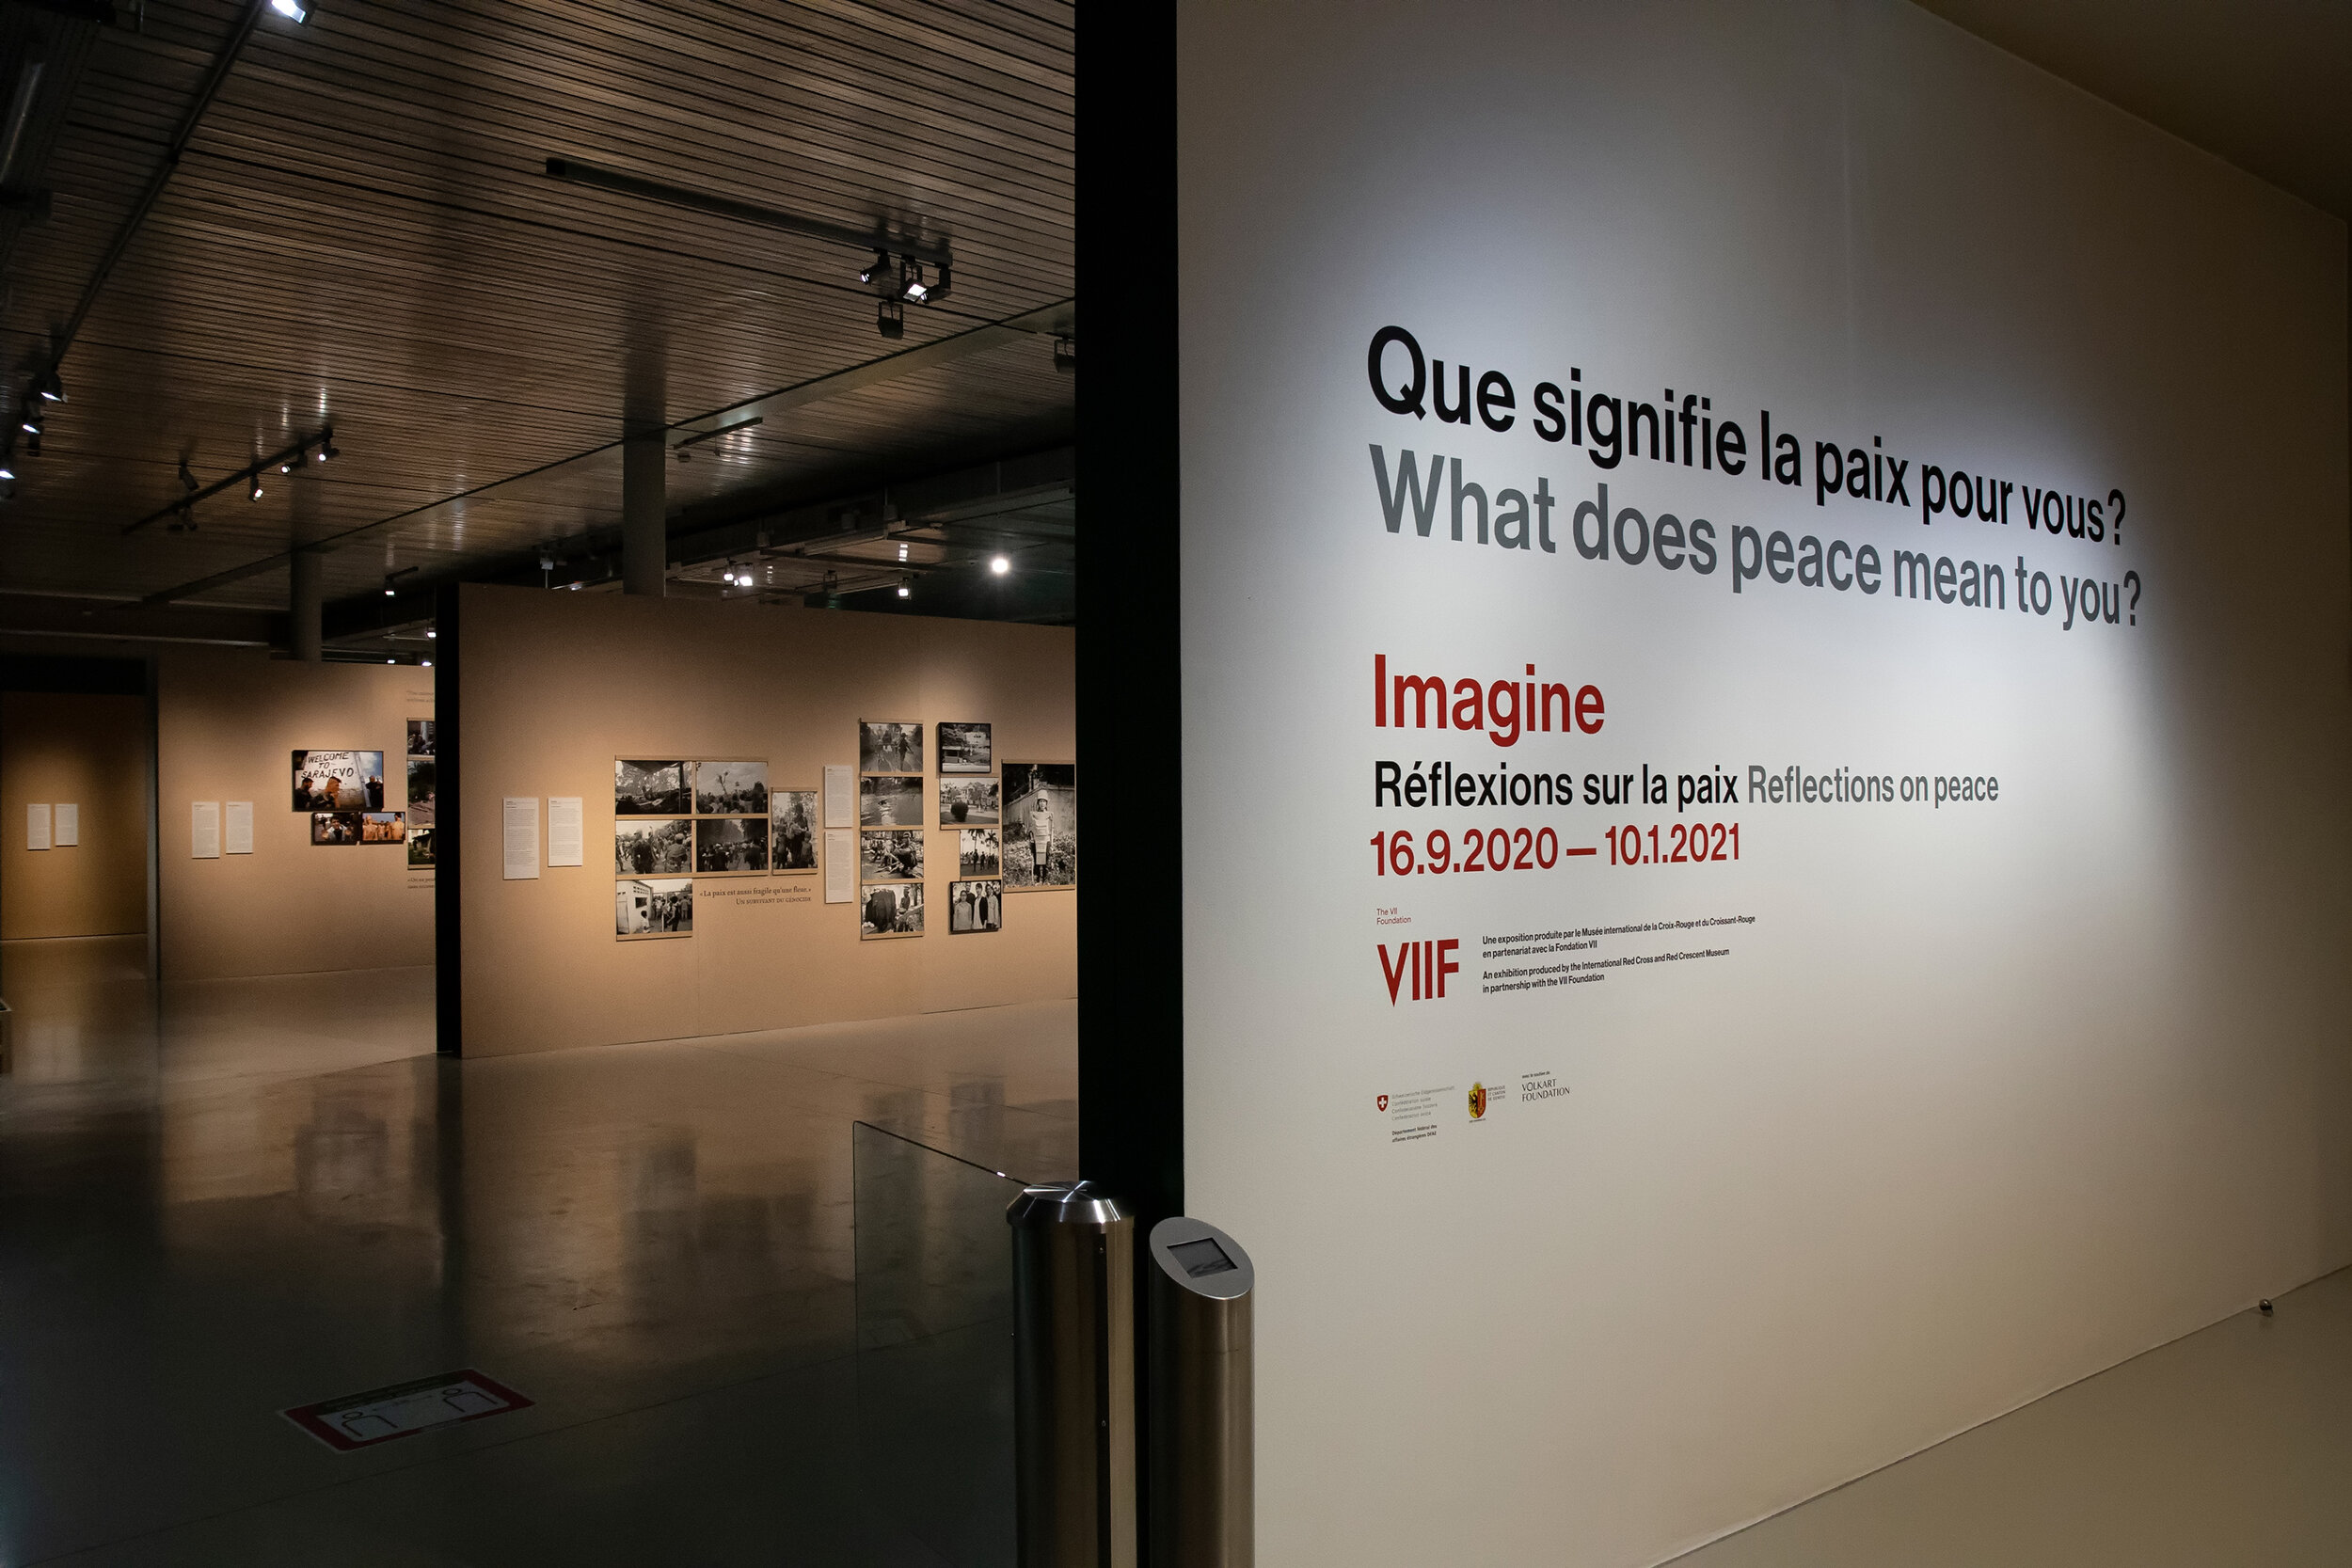  Geneva, Switzerland, 09/14/2020Imagine. Reflections on Peace exhibition at the International Red Cross and Red Crescent Museum in Geneva.The exhibition is a part of VII Foundation's Peace Project.Credit: Maciek Nabrdalik / VII 